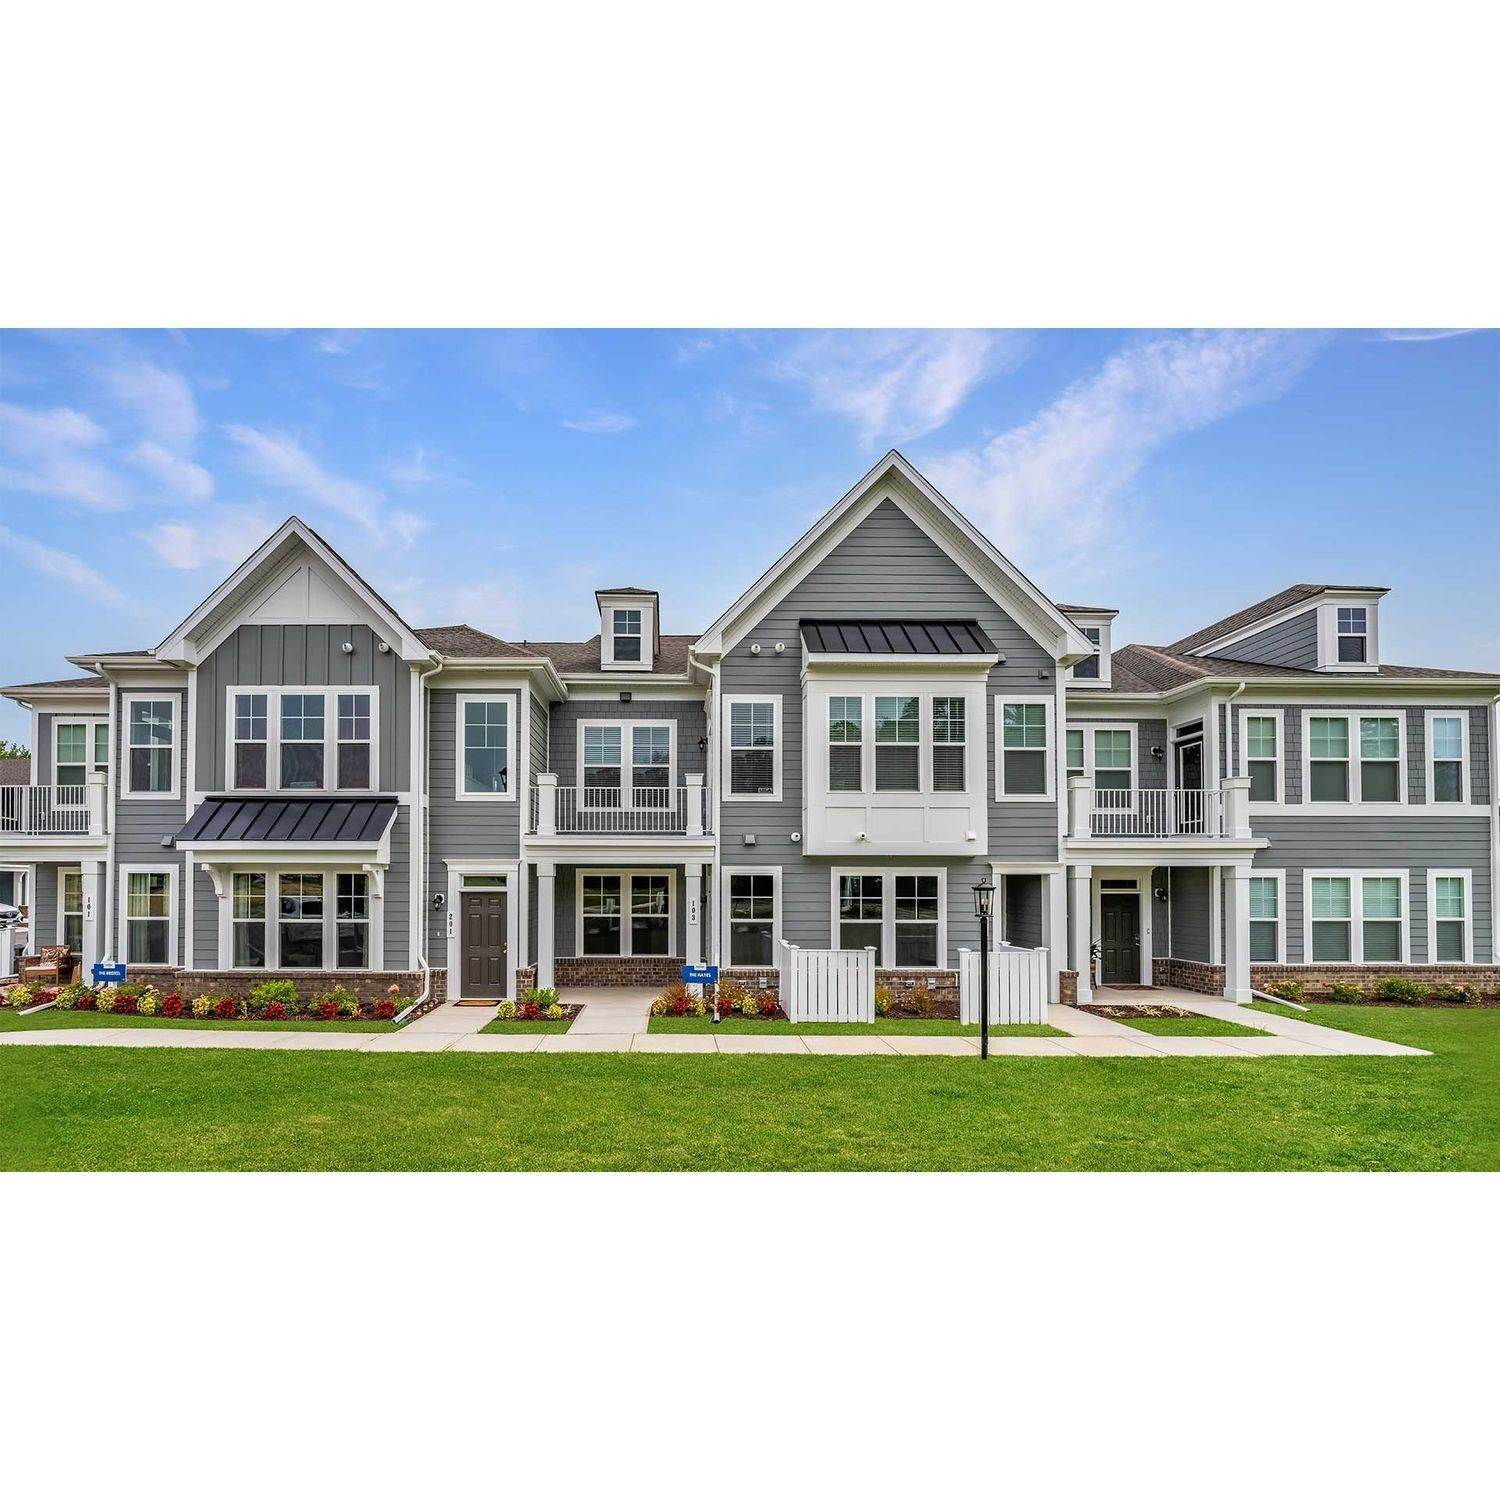 4. The Pointe at Twin Hickory byggnad vid 4605 Pouncey Tract Road, Glen Allen, VA 23059